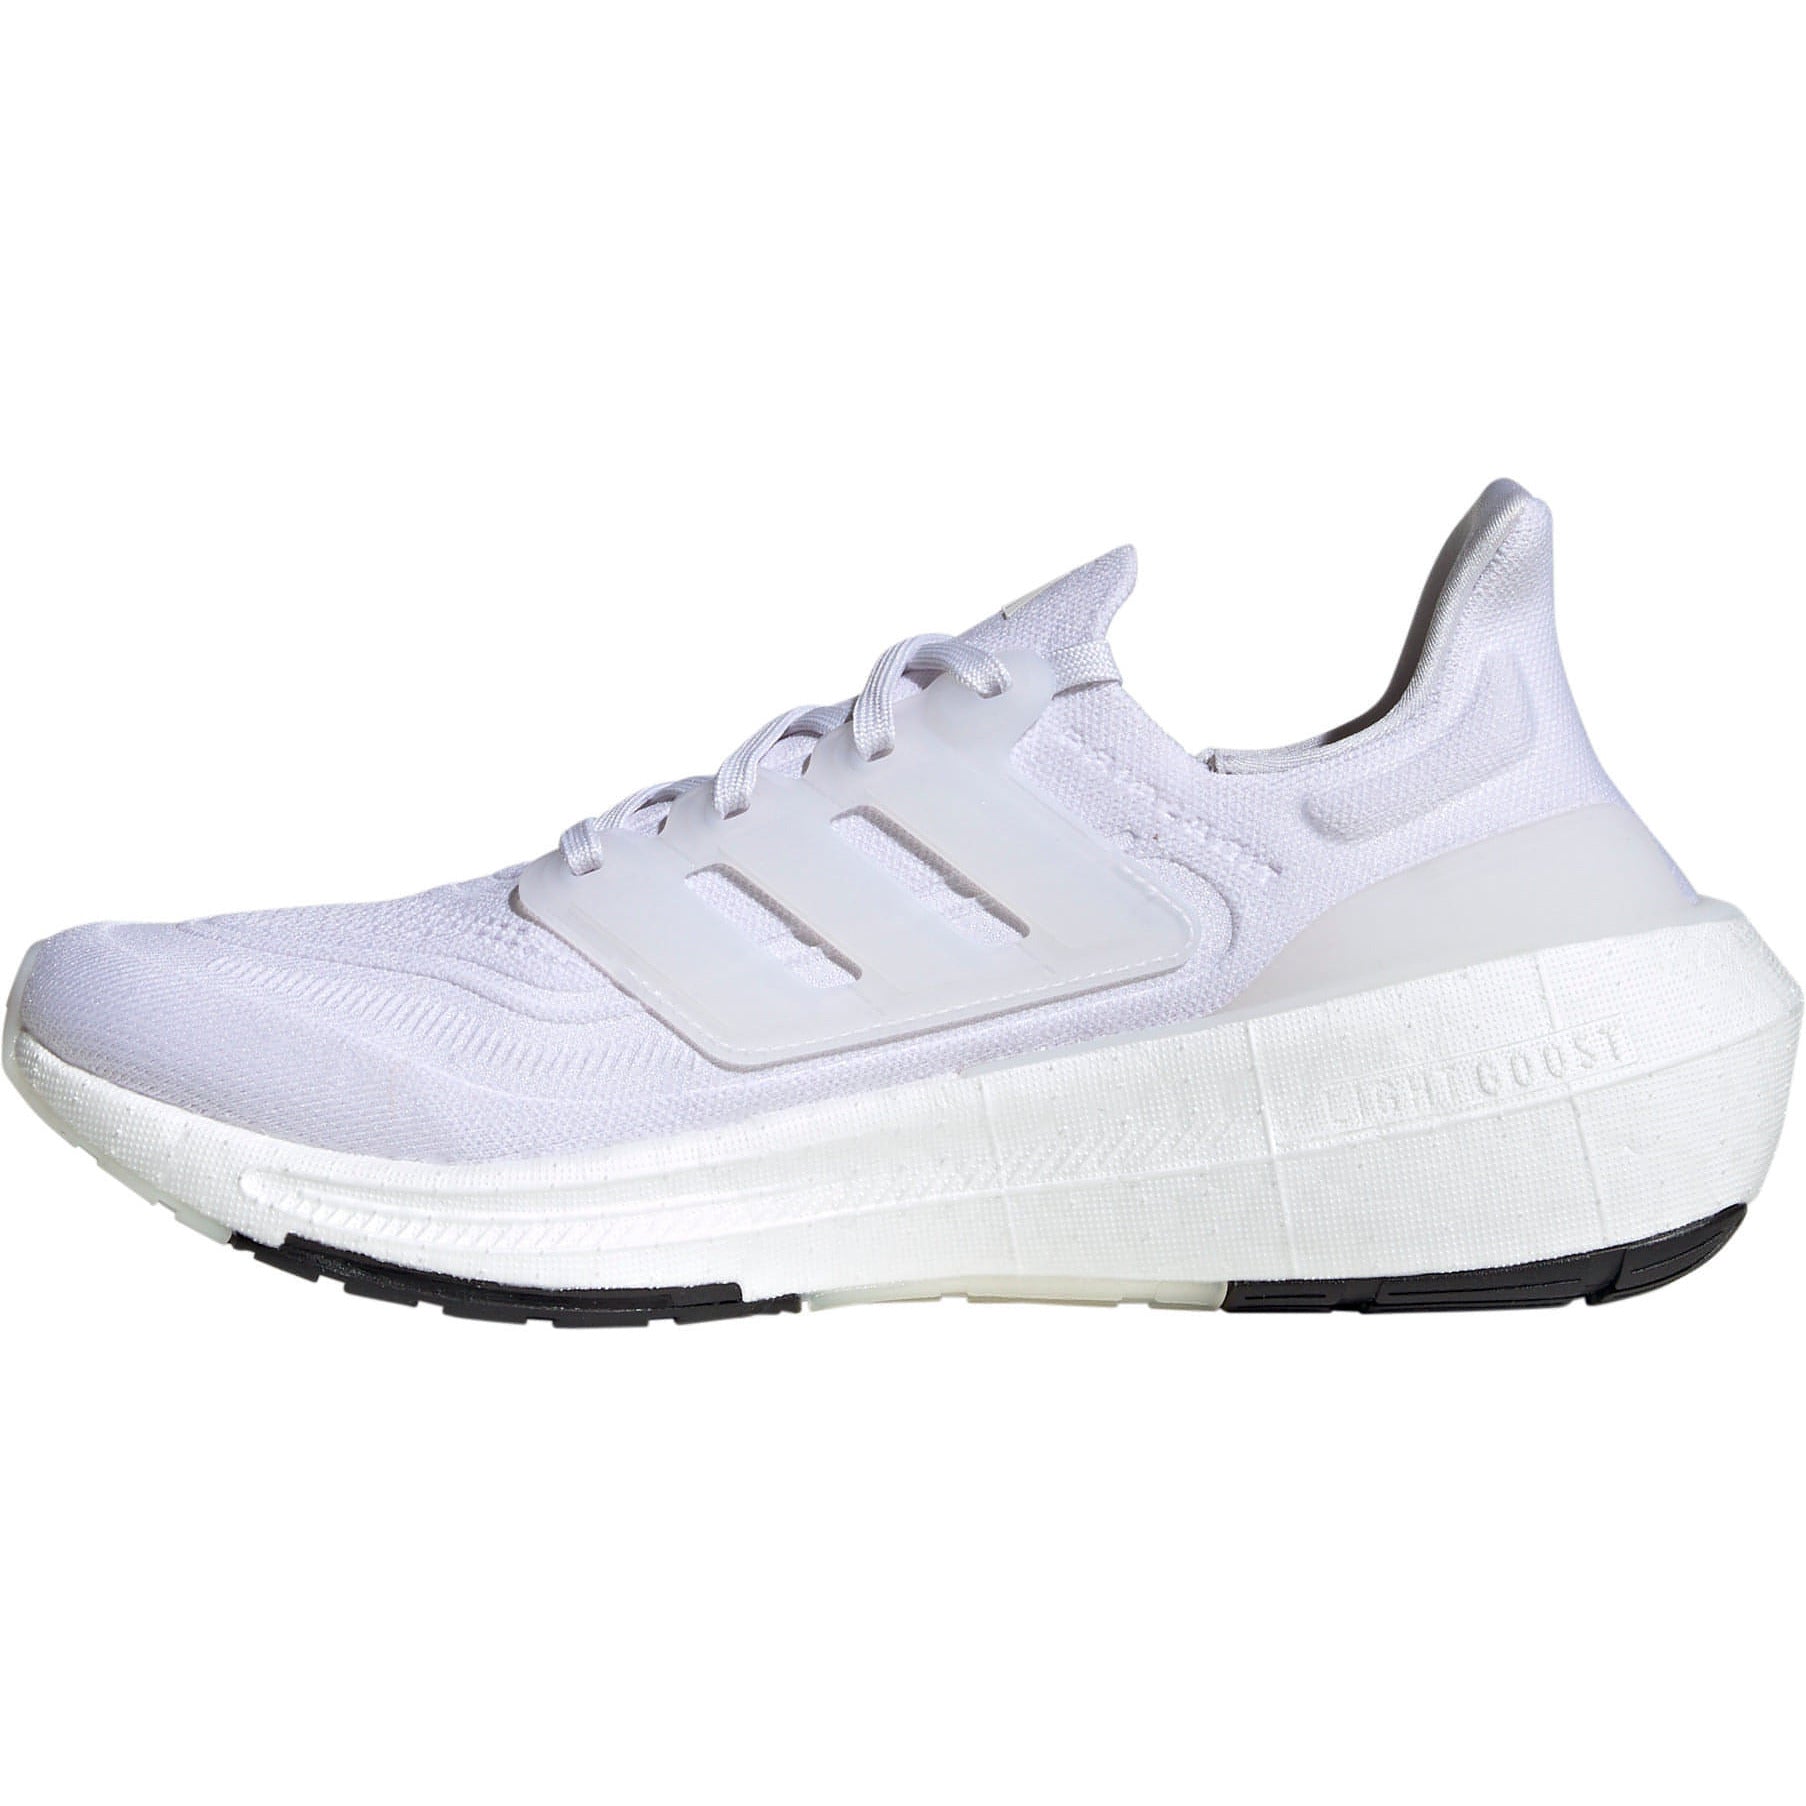 Adidas Ultra Boost Light Gy9350 Inside - Side View